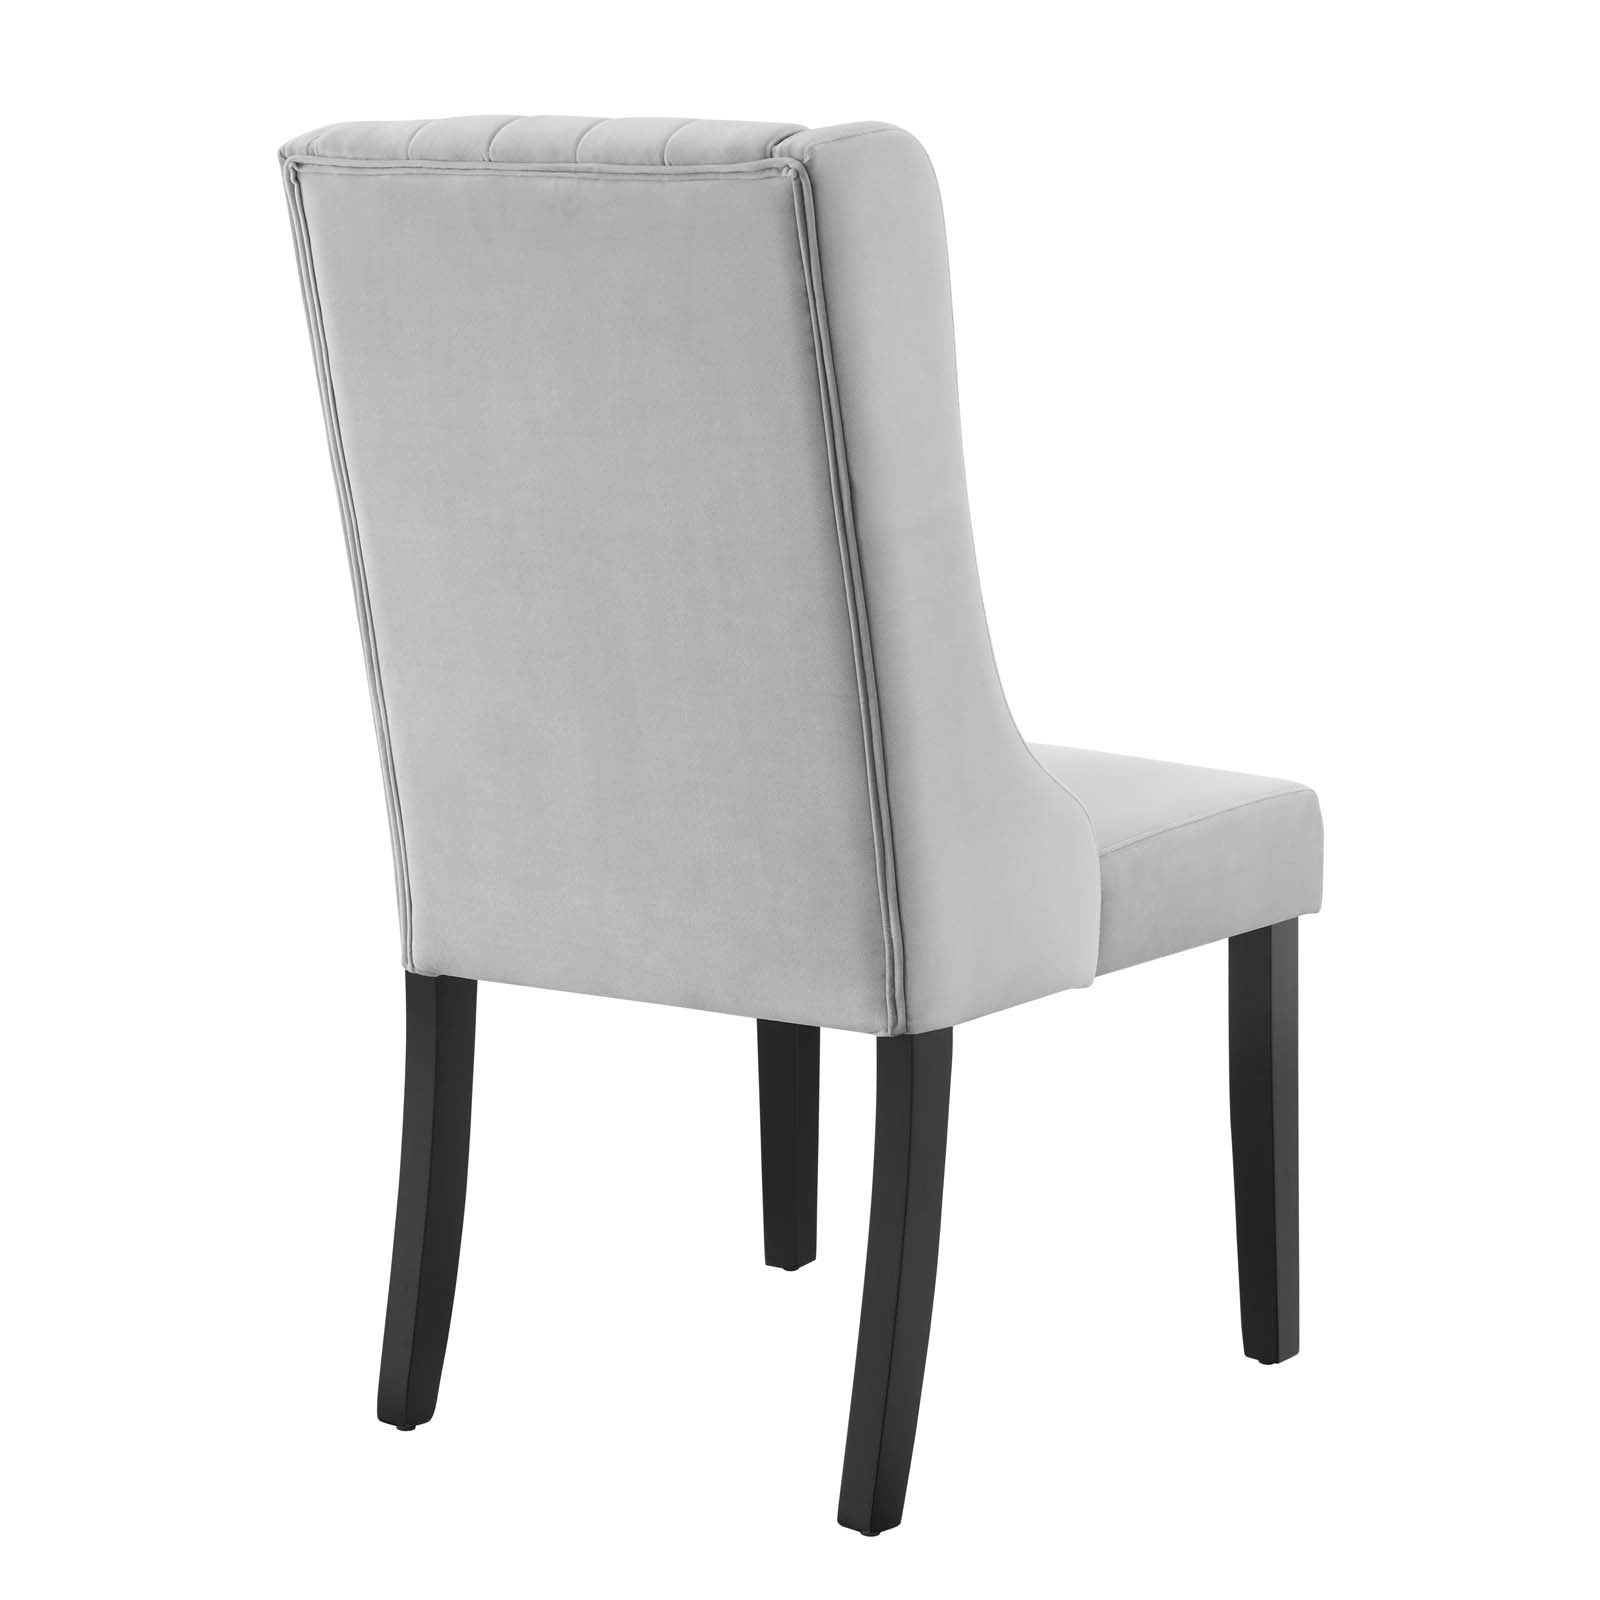 Modway Dining Chairs - Renew Parsons Performance Velvet Dining Side Chairs - Set of 2 Light Gray